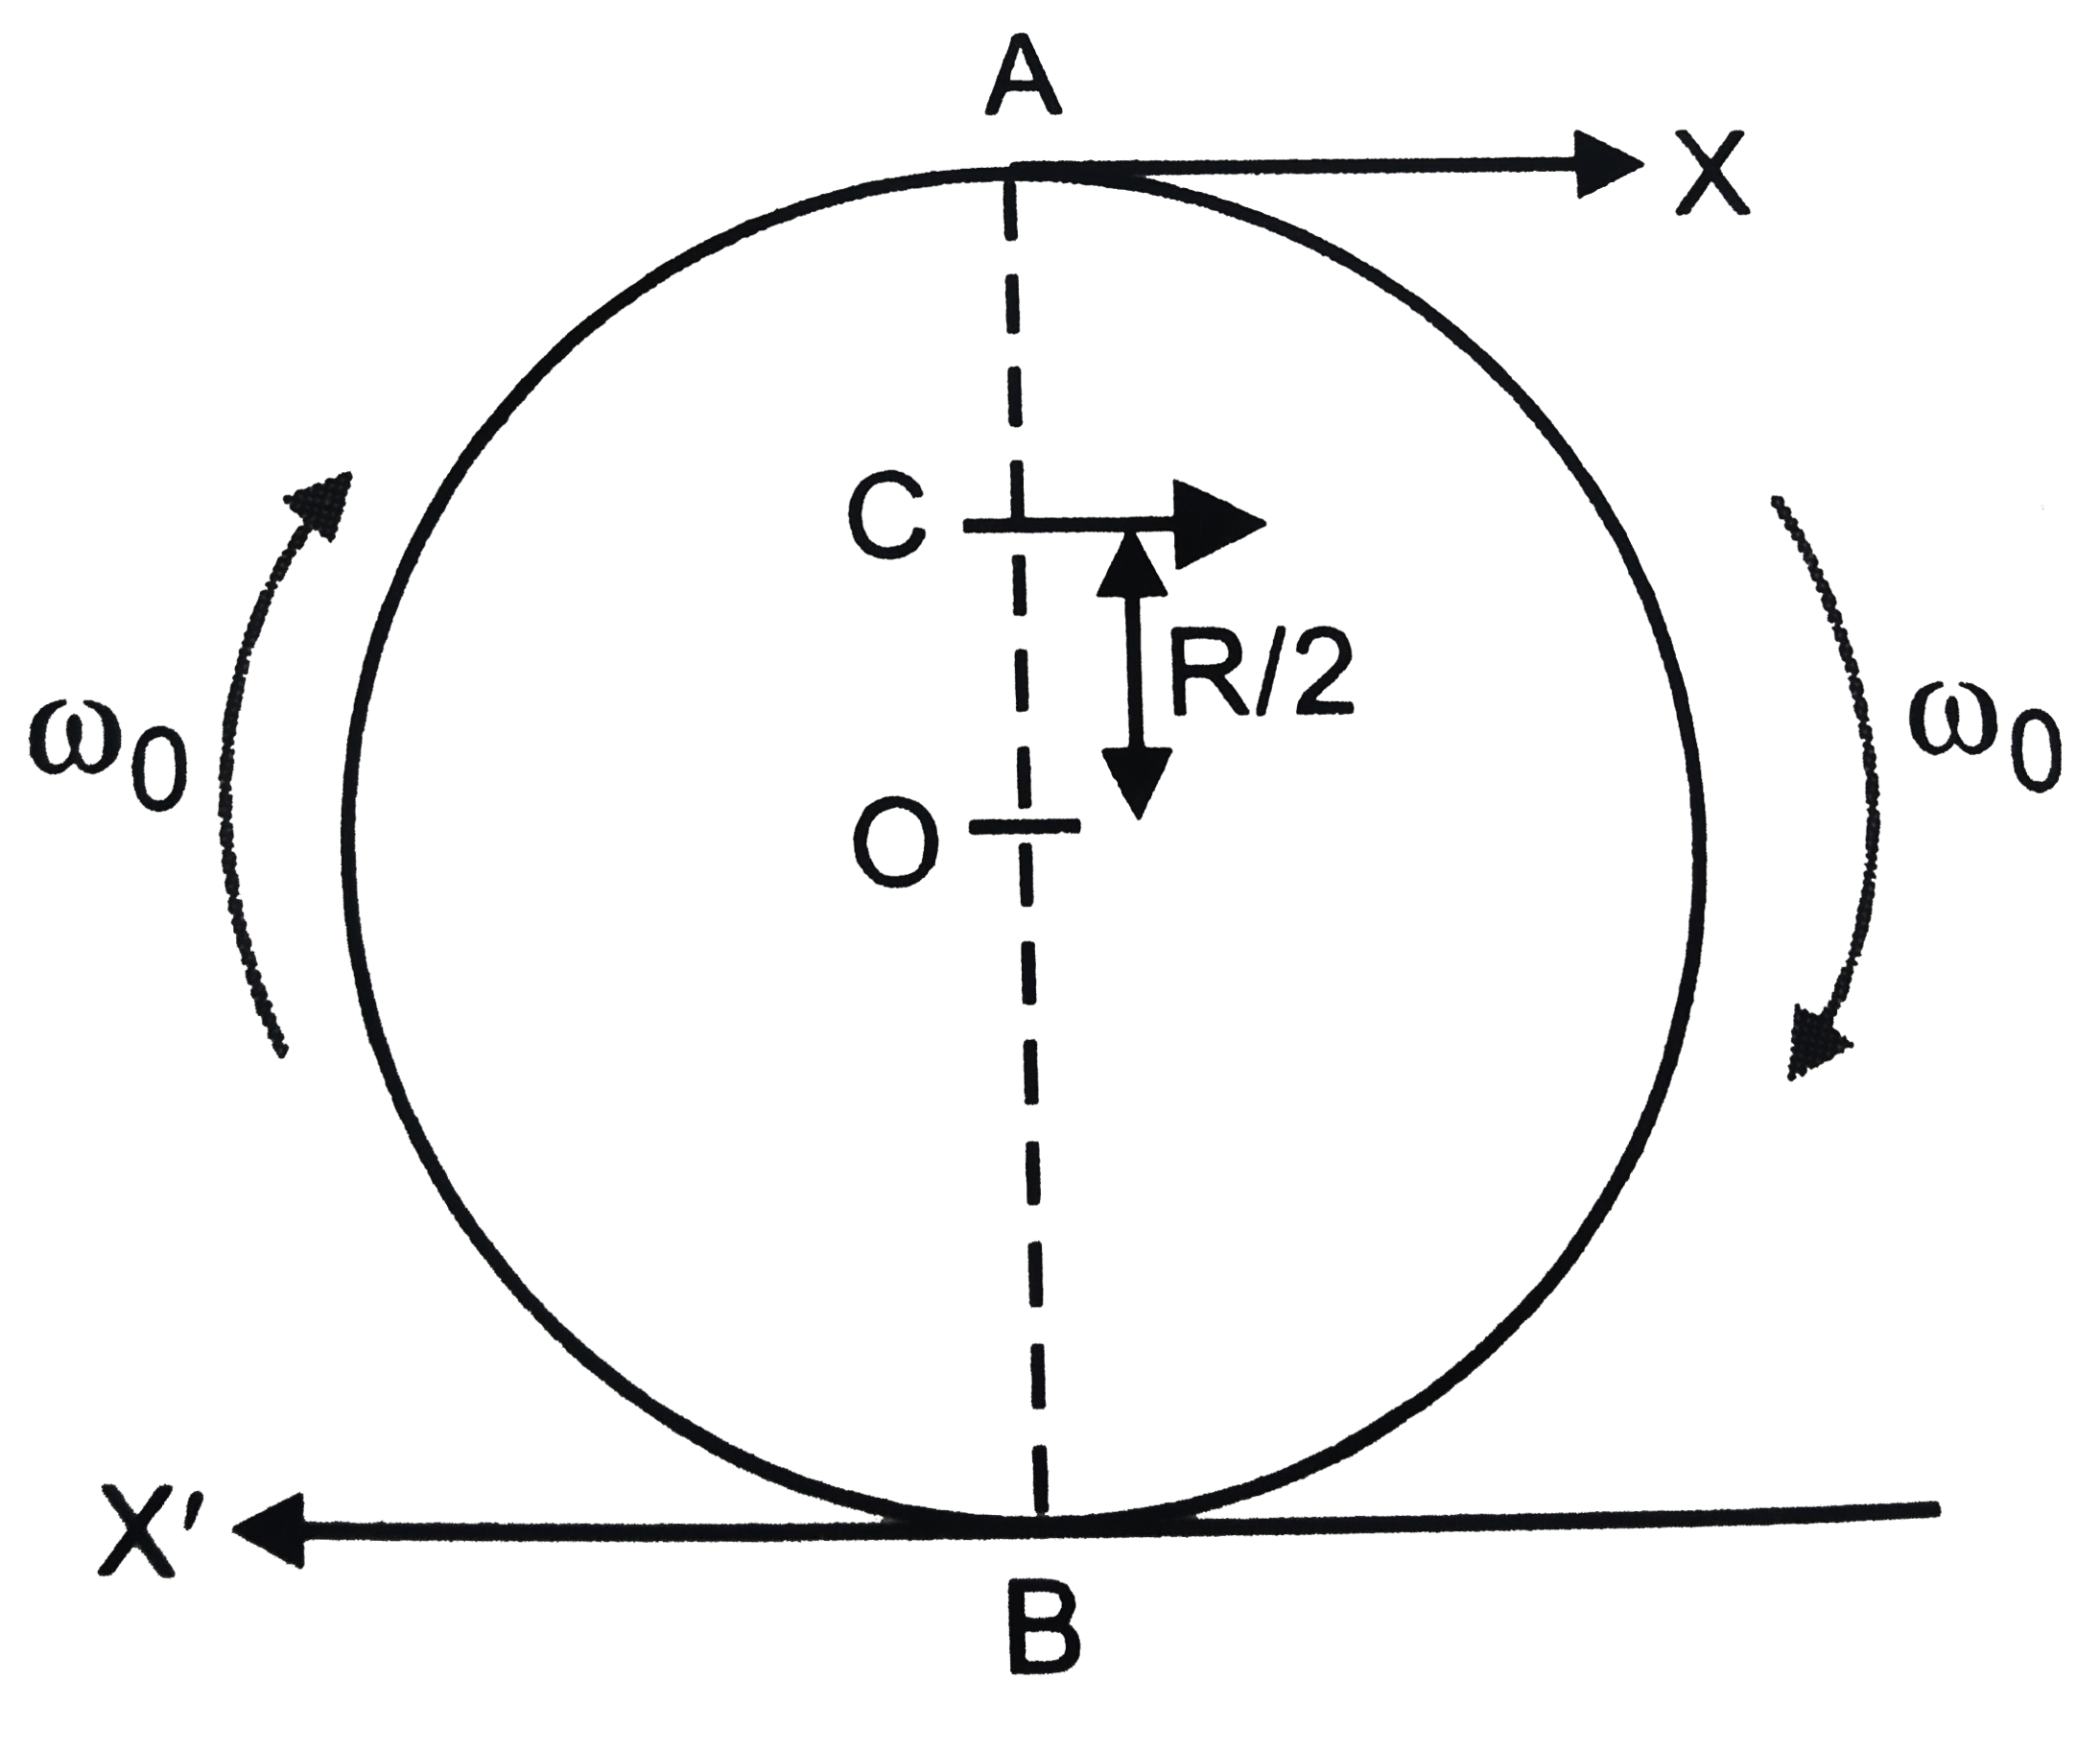 A disc rotating about its axis with angular speed omega(0) is placed lightly (without any translational pull) on a perfectly frictionless table. The radius of the disc is R. What are the linear velocities of the points A, B and C on the disc shown in Fig. Will the disc roll in the direction indicated ?